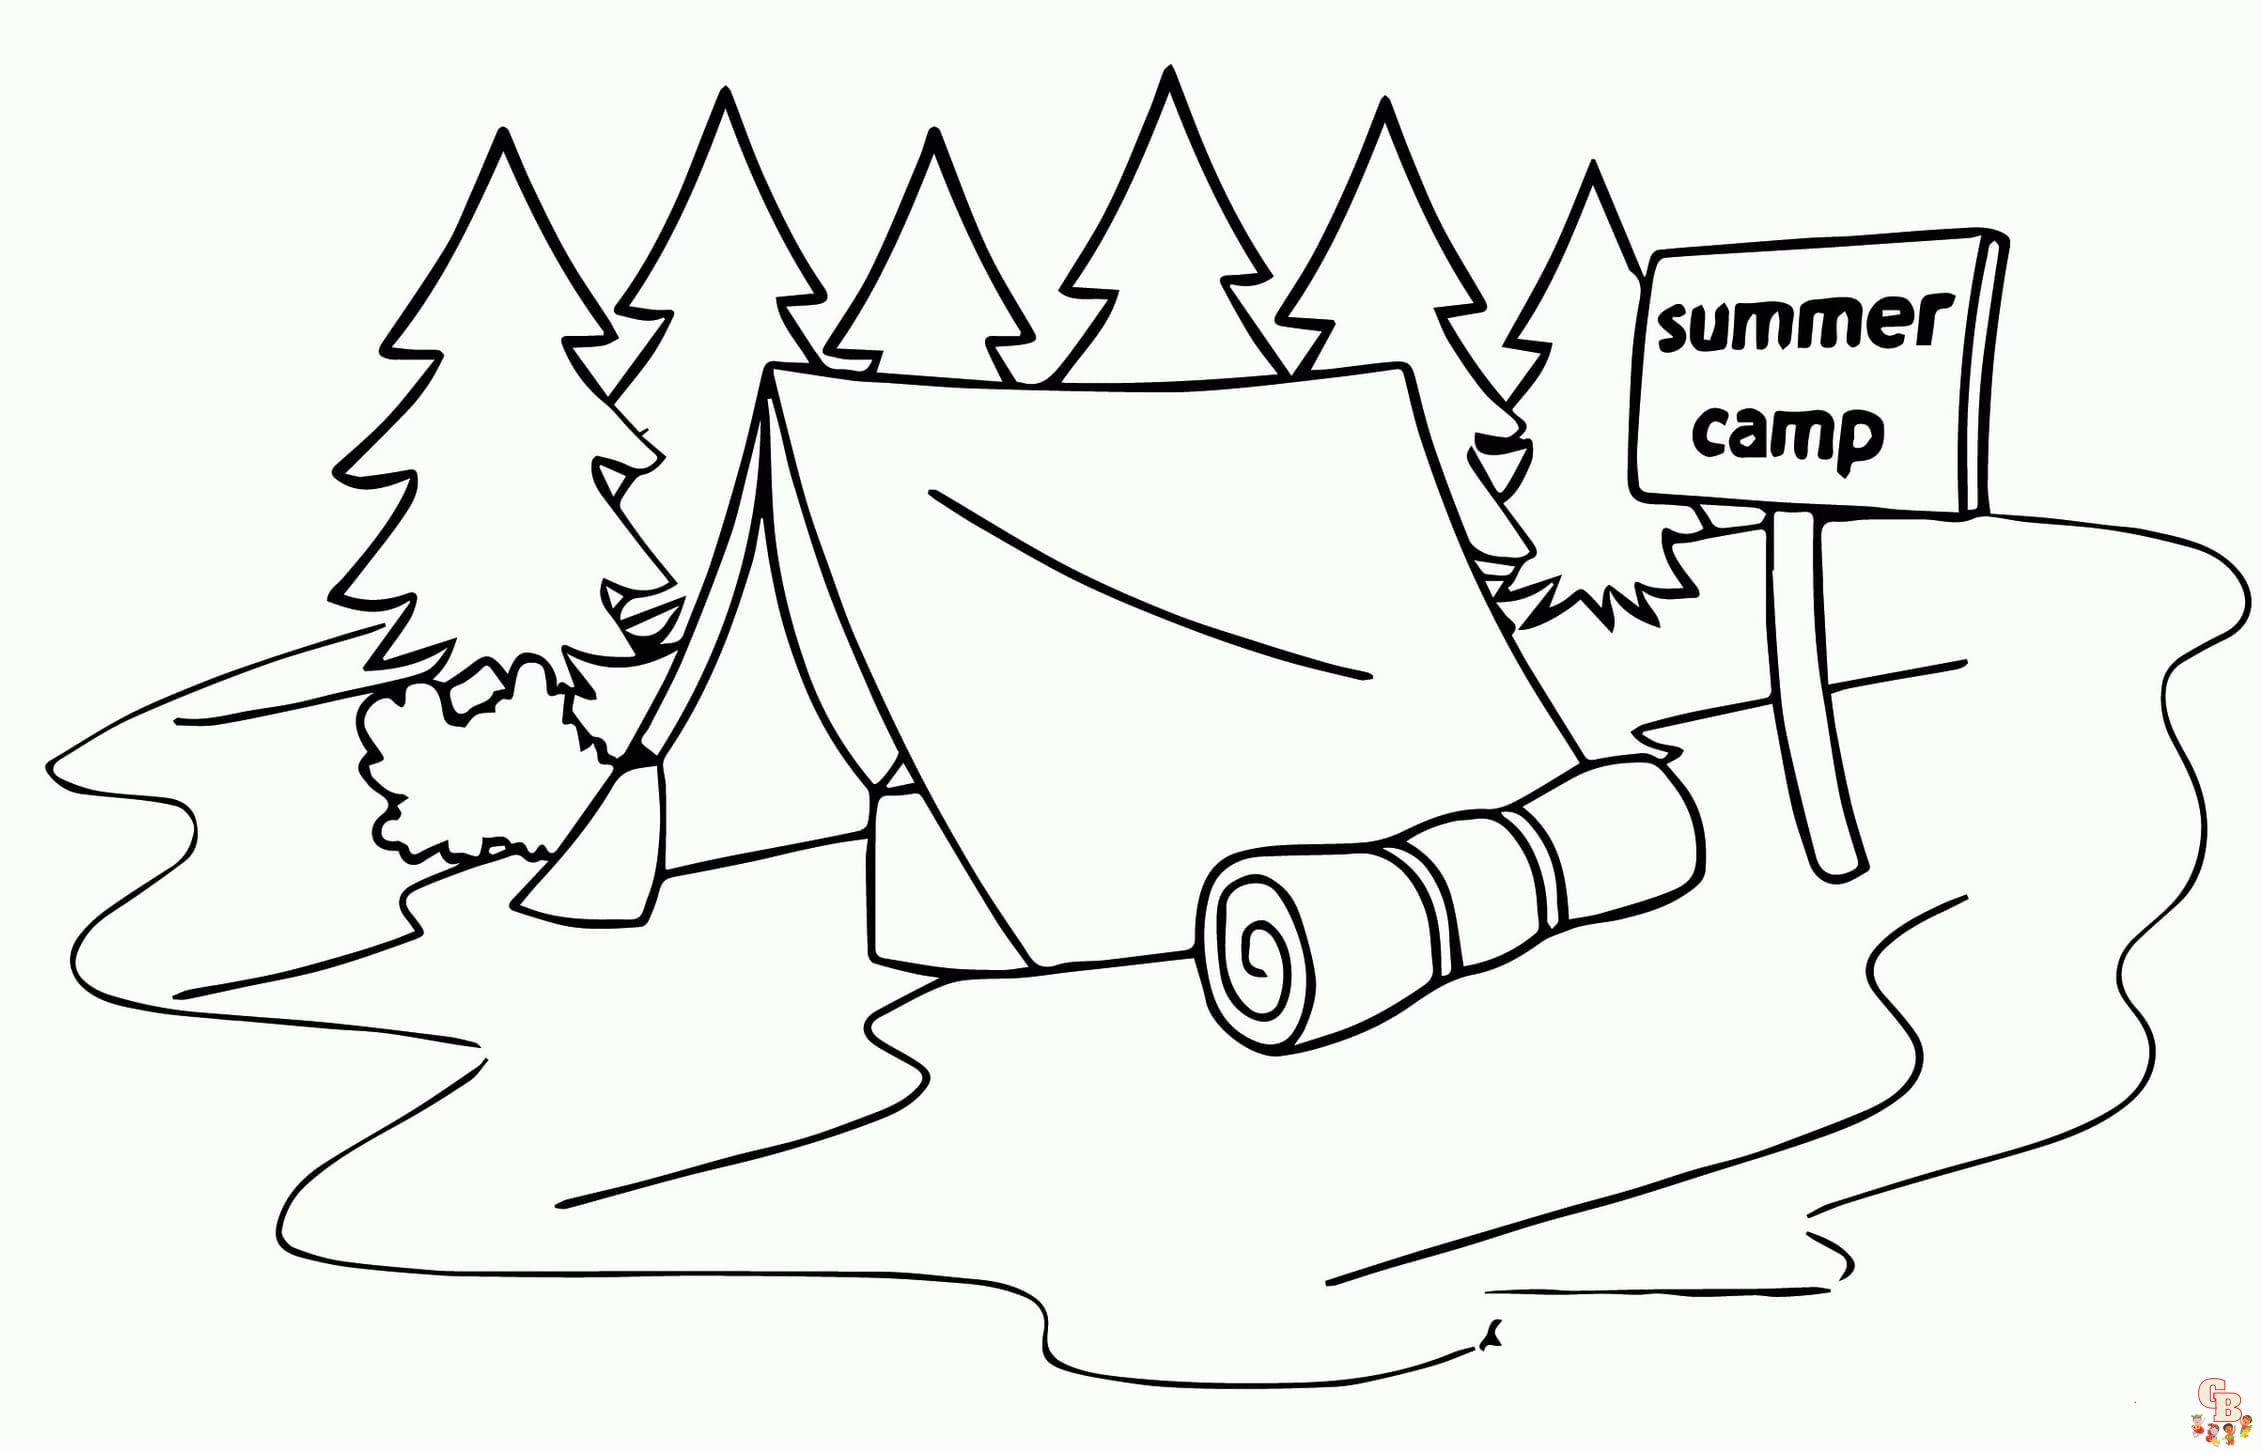 Tent coloring pages printable free